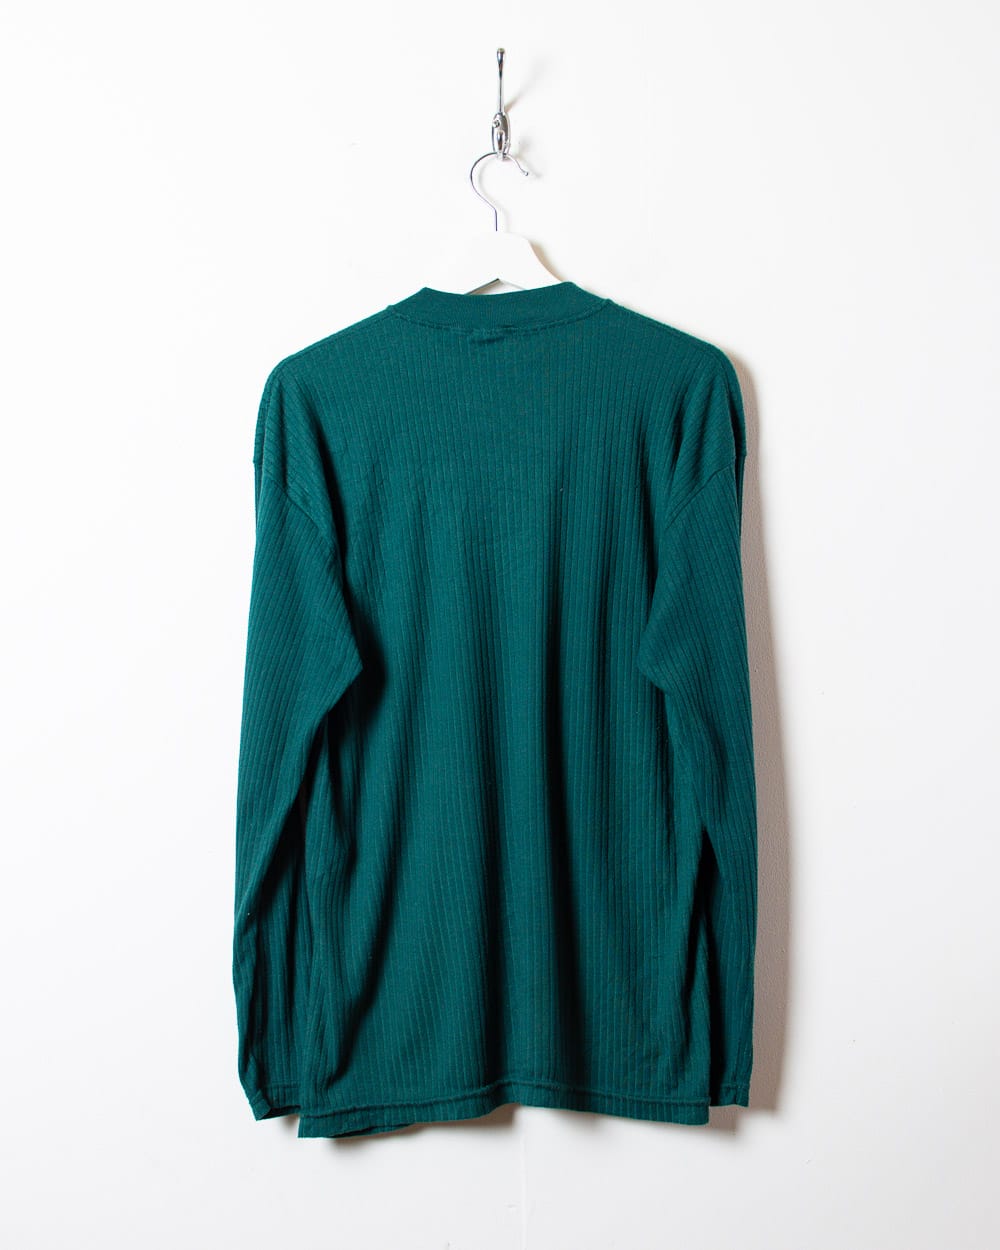 Green Levi's Textured Long Sleeved T-Shirt - Large